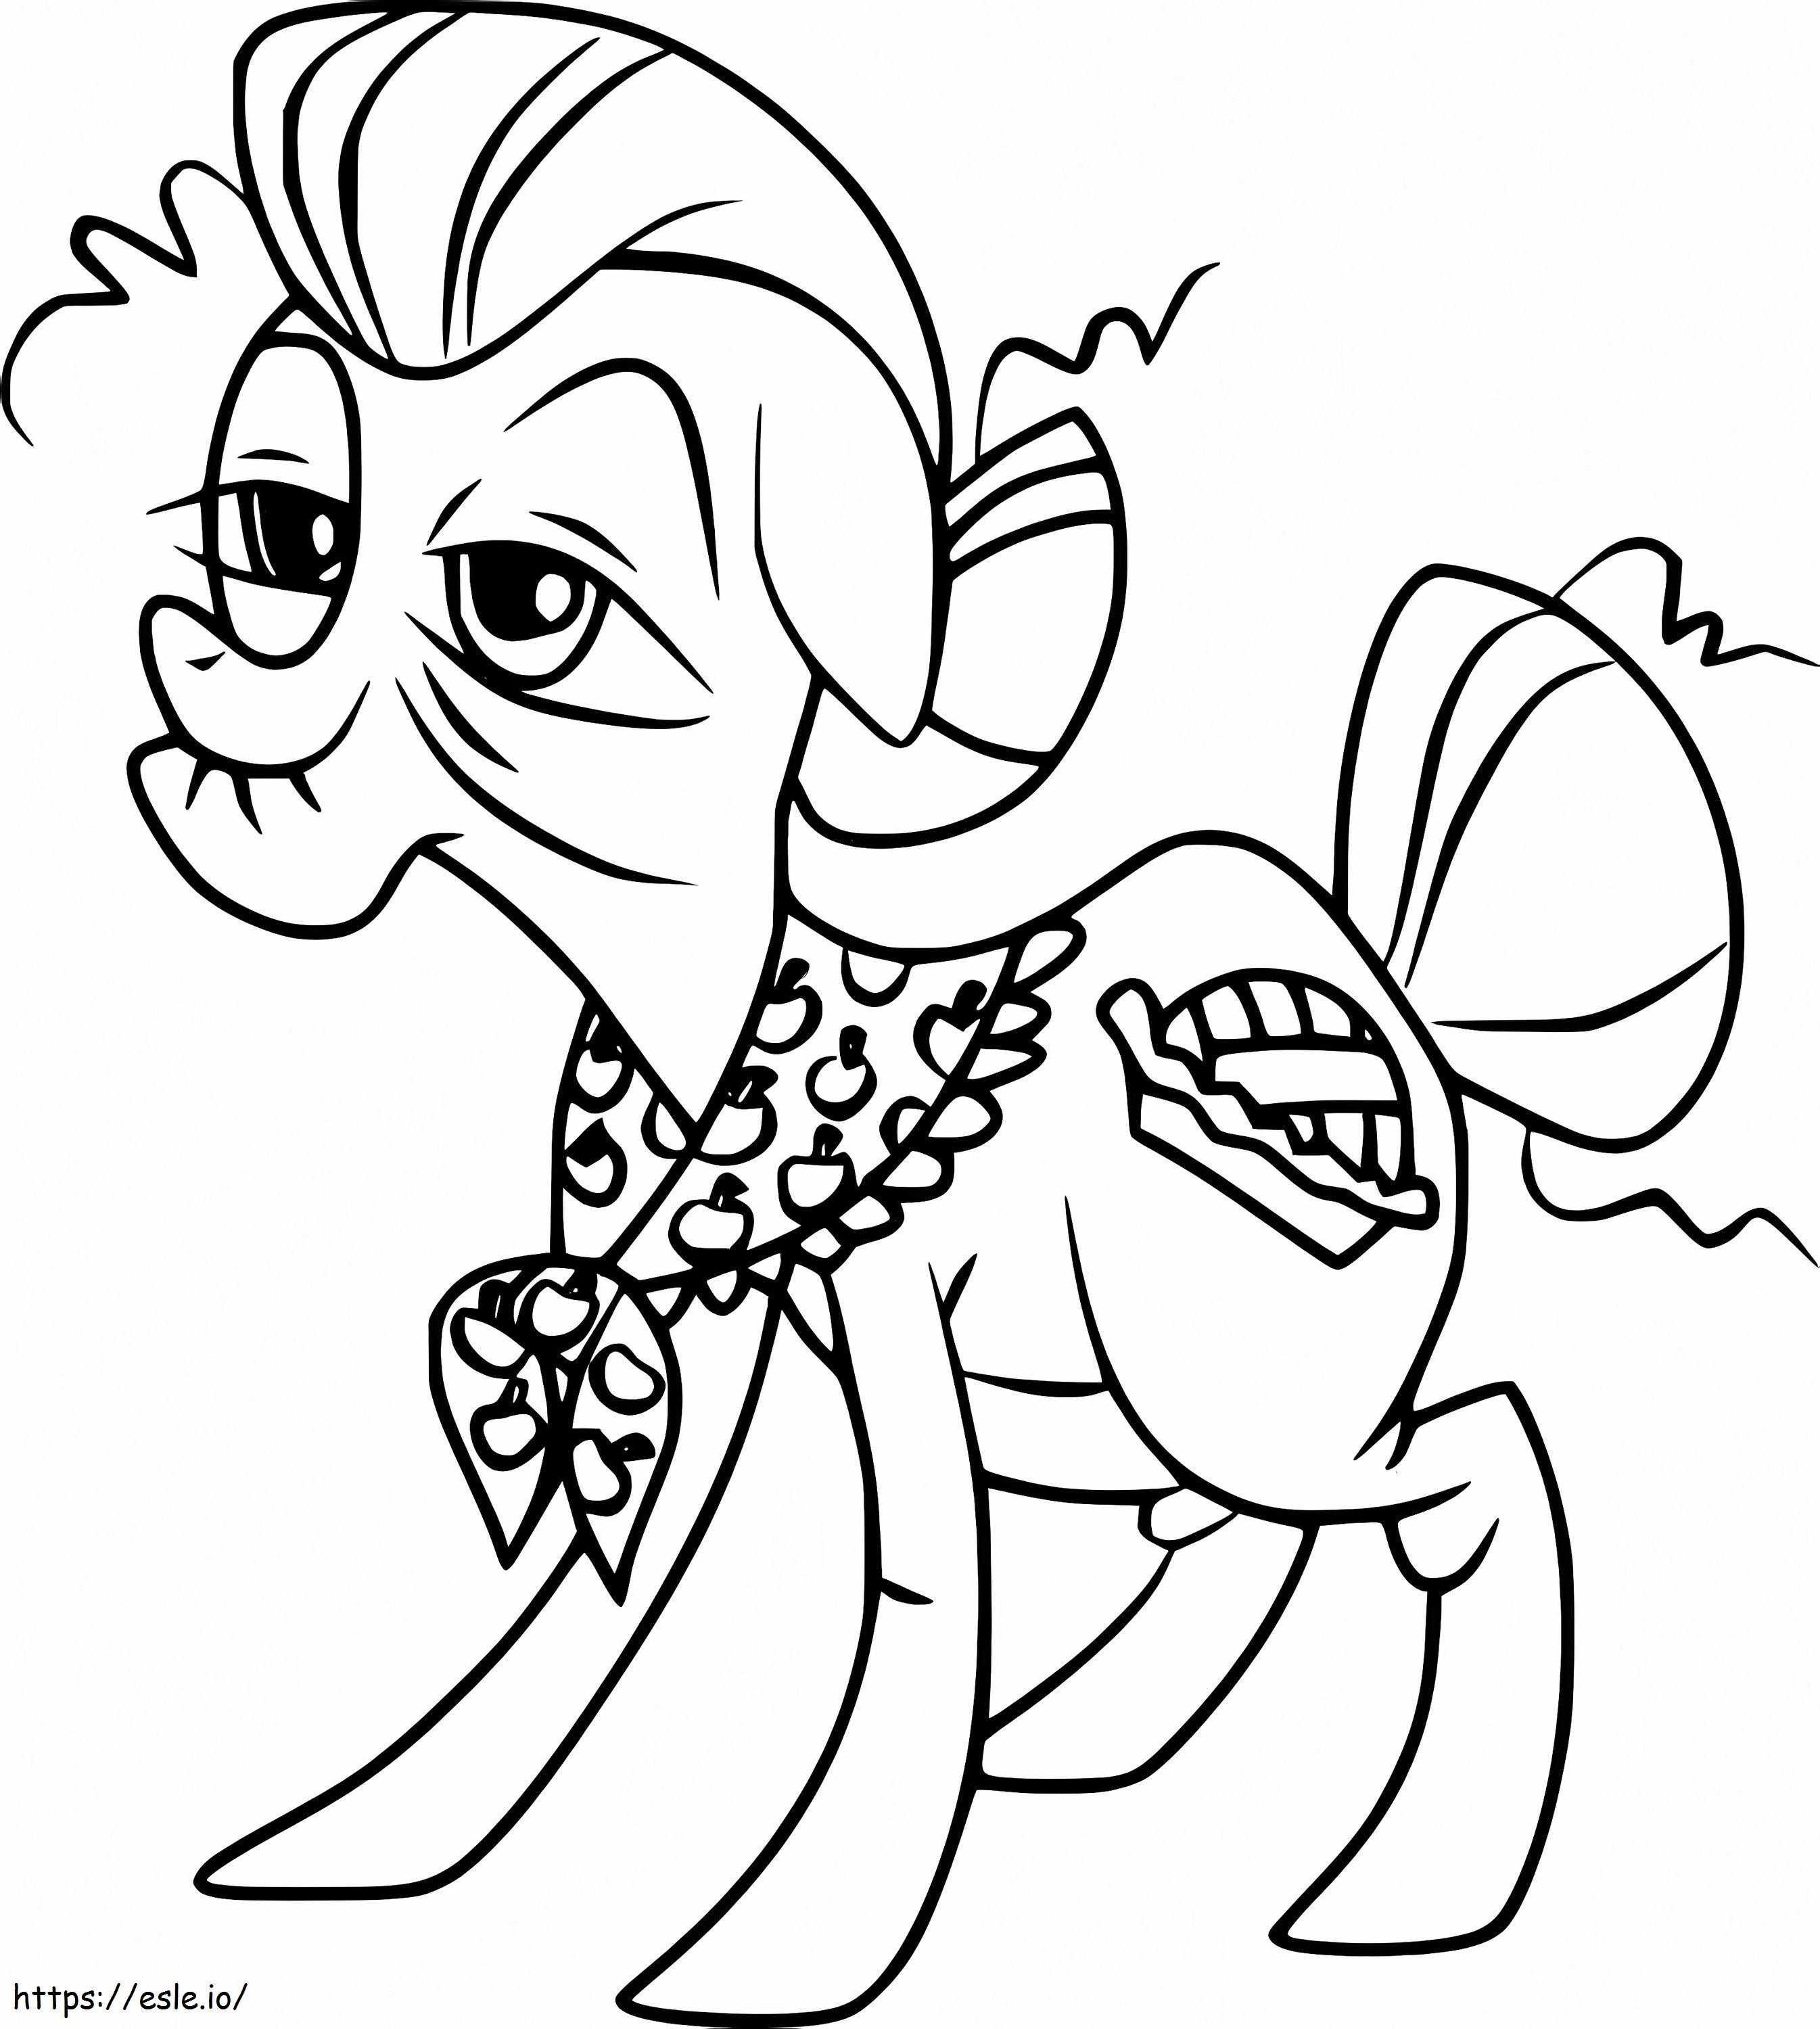 Granny Smith My Little Pony coloring page